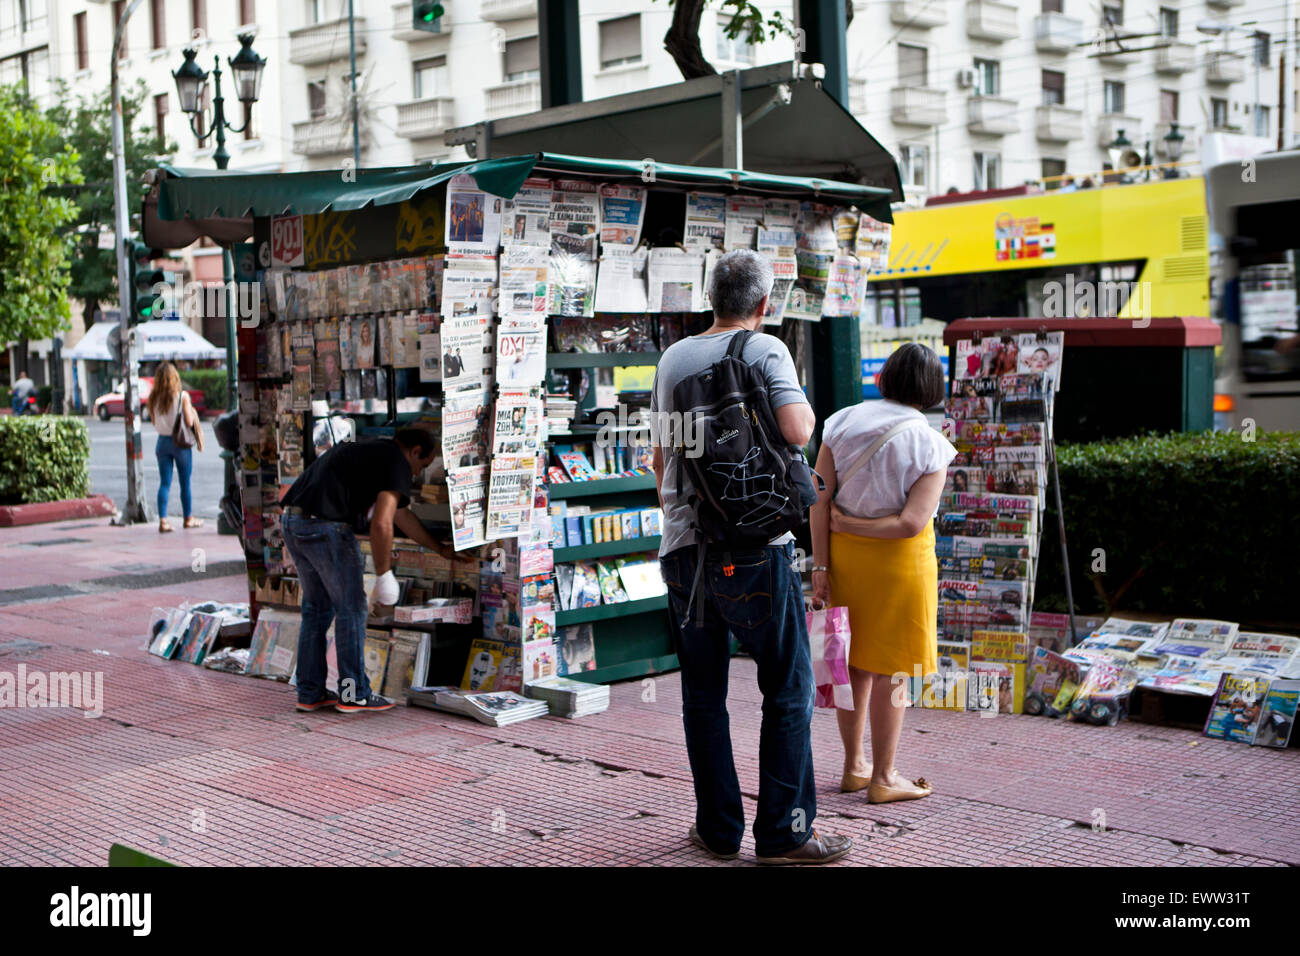 Newspapers at a Kiosk amid the Grexit Crisis in Athens Stock Photo